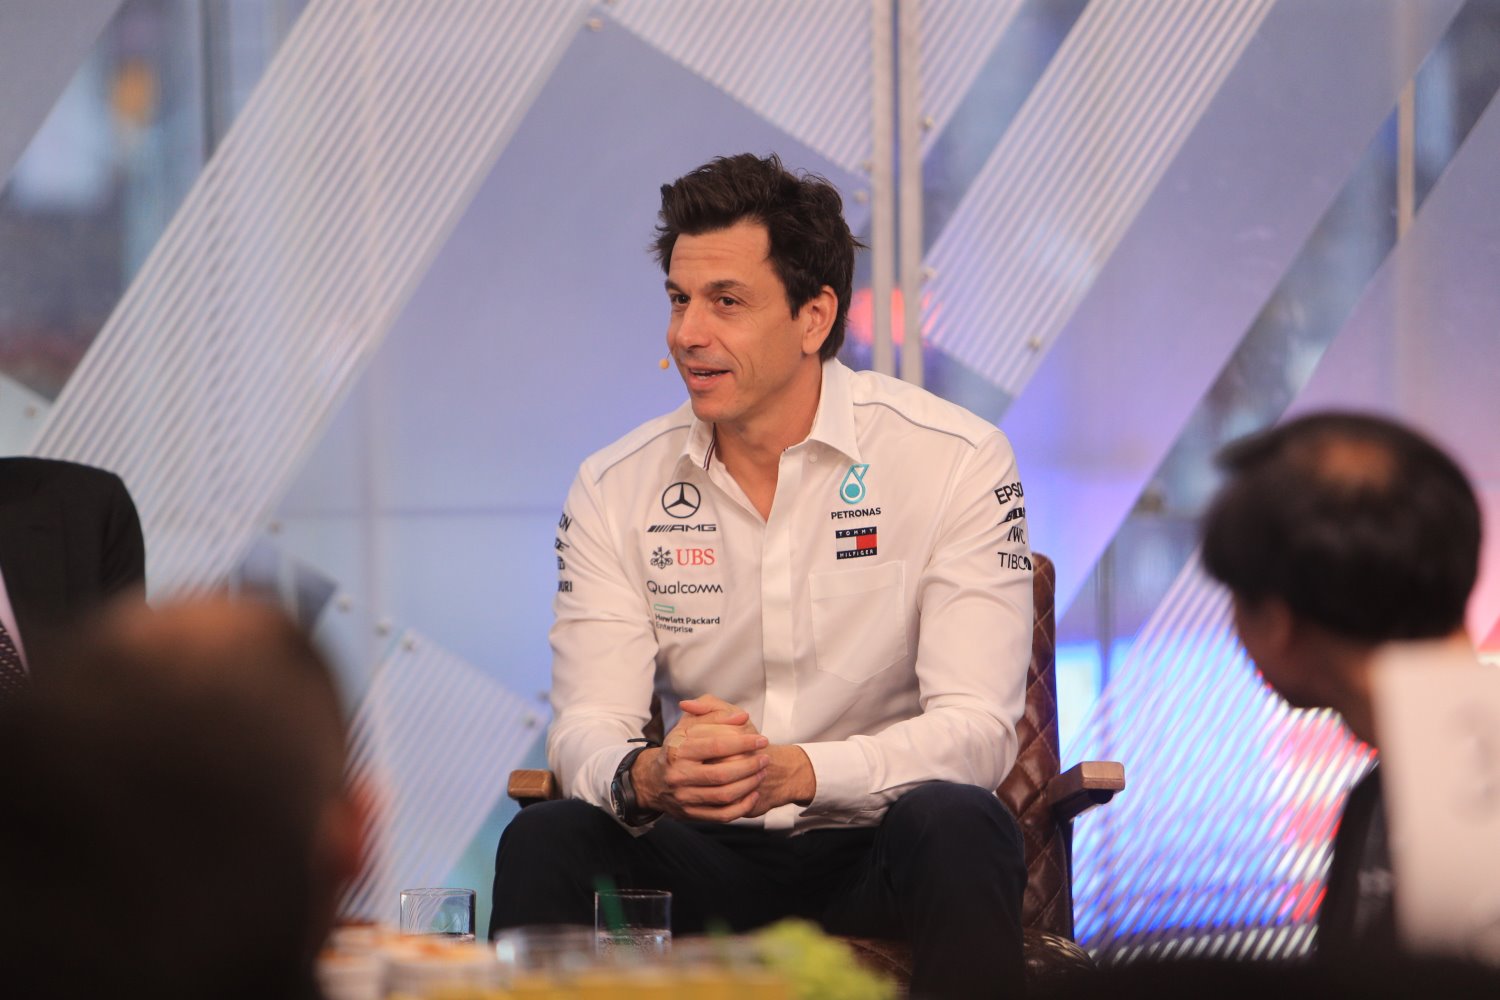 Toto Wolff will have to beat Kubica's $10M check if he wants Ocon to drive for Williams